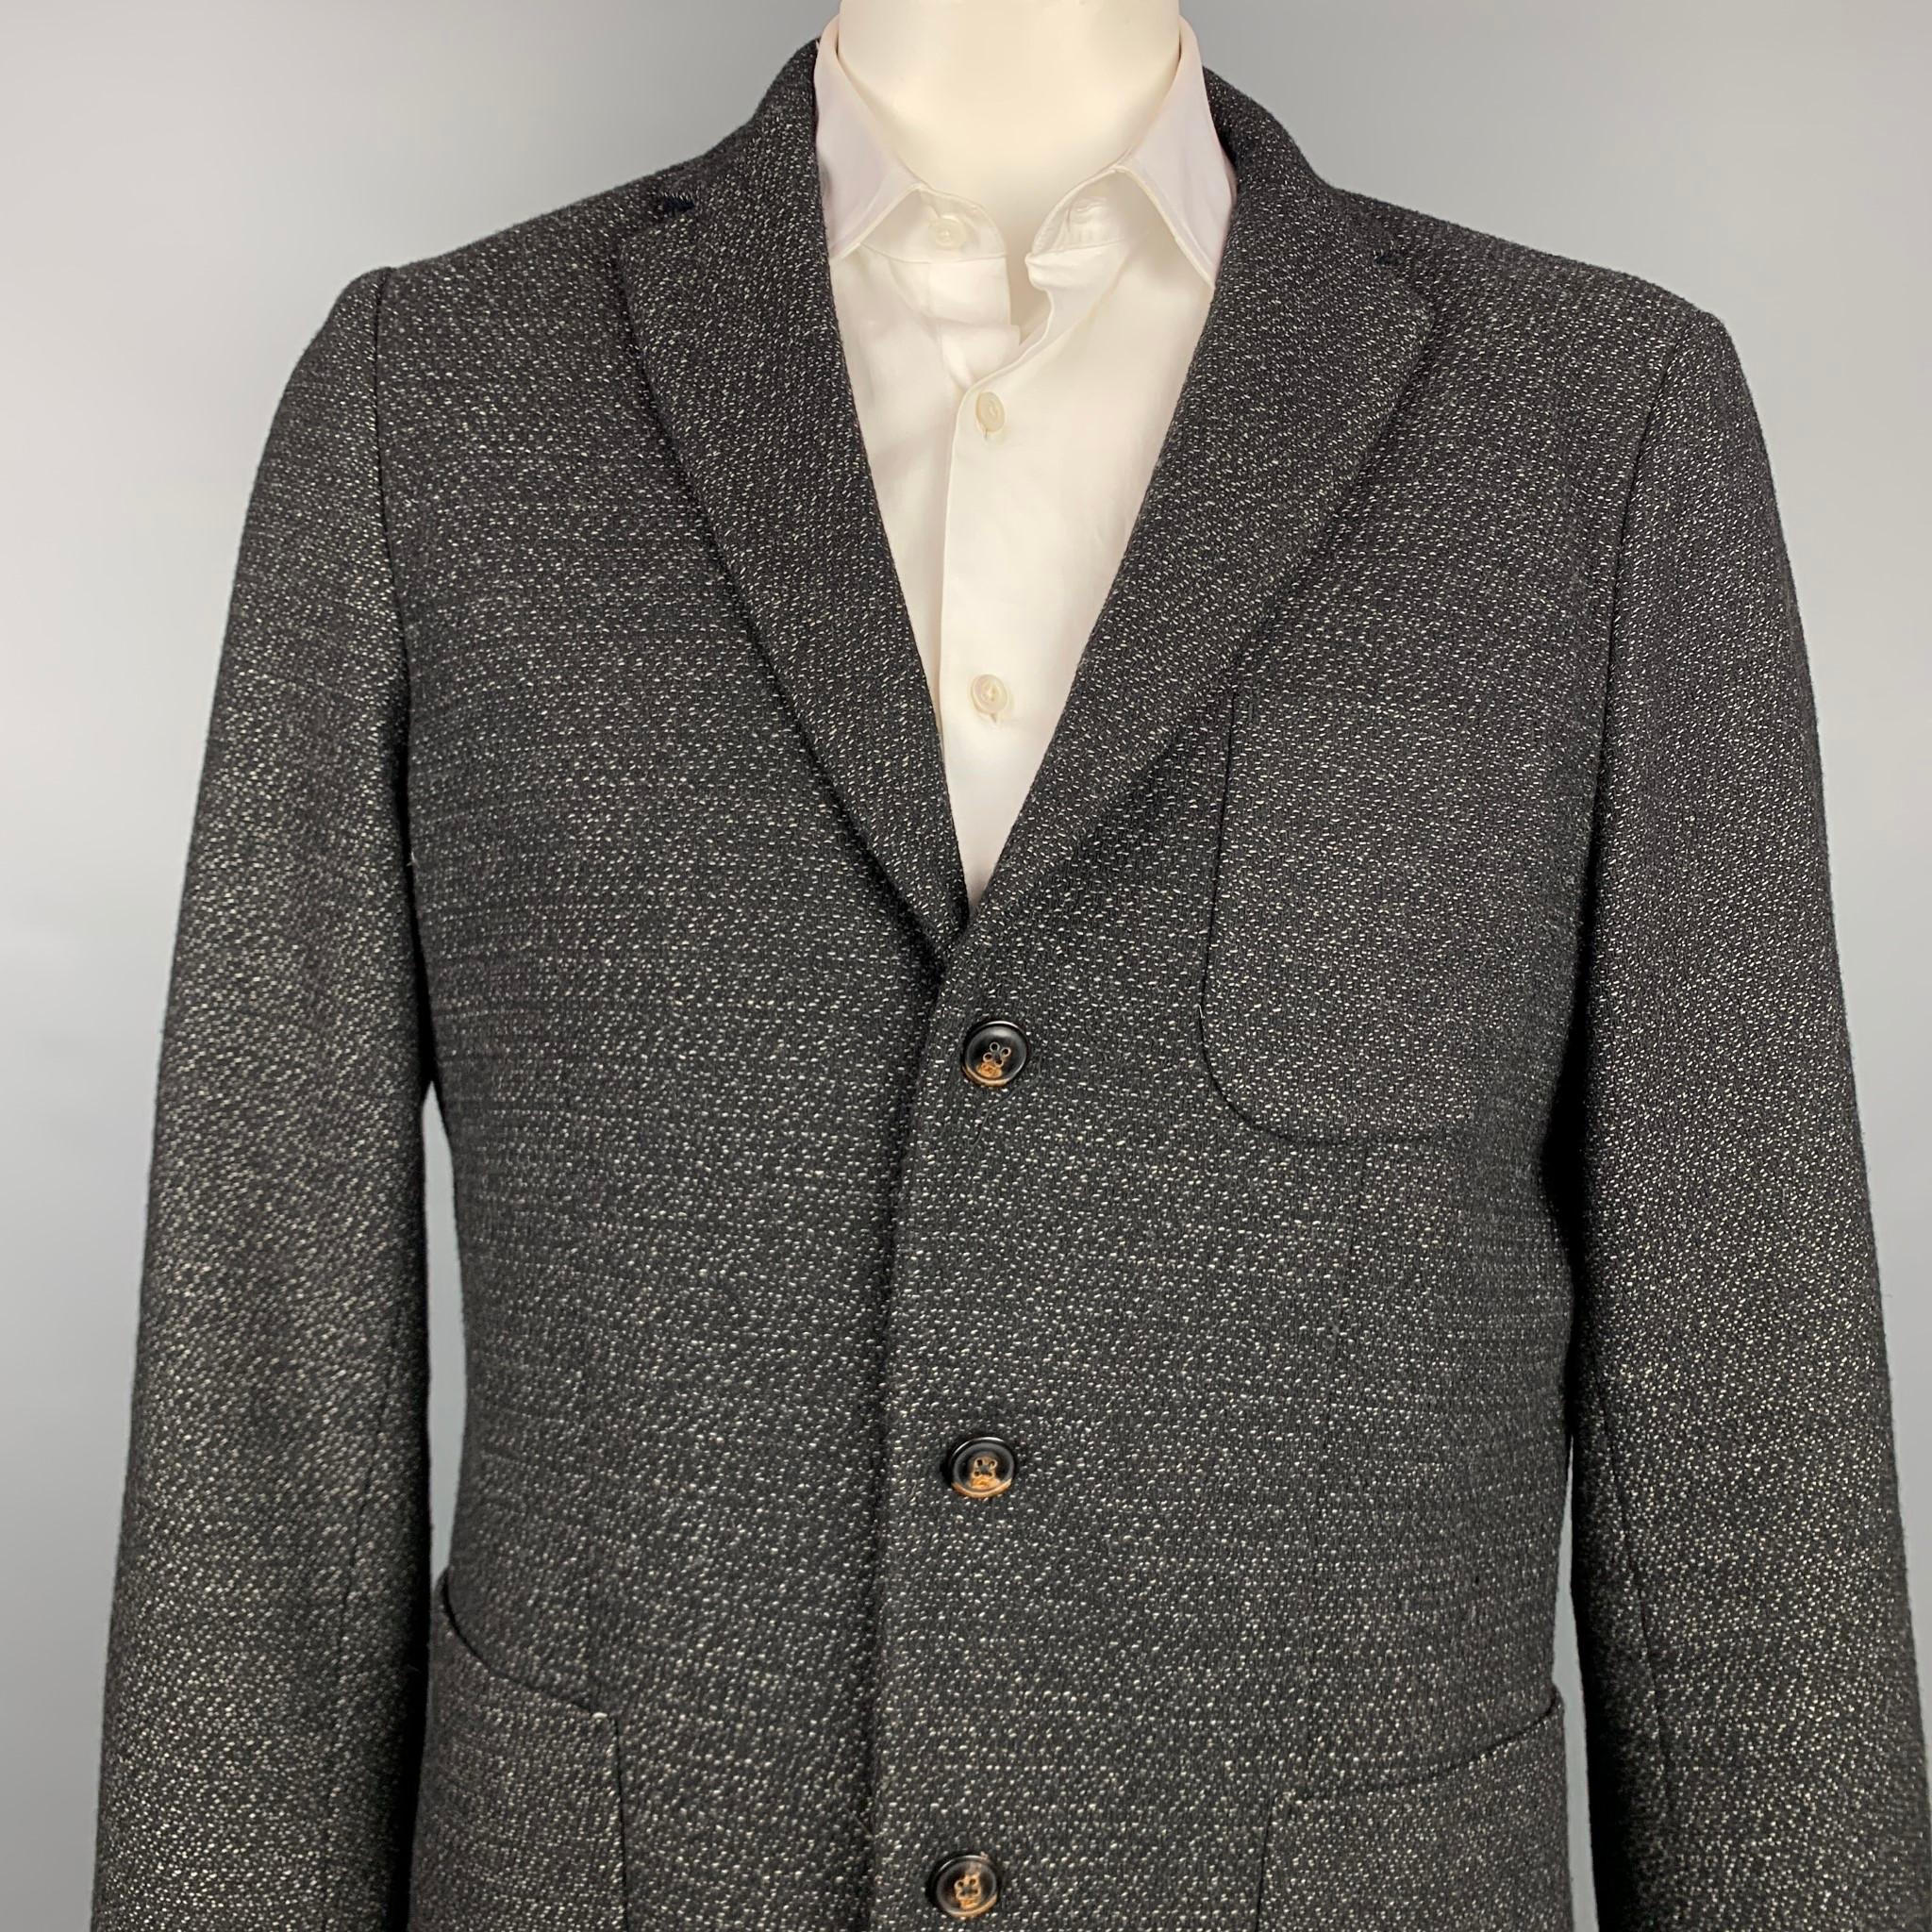 SCOTCH AND SODA sport coat comes in a black & white wool / polyester with no liner featuring a notch lapel, tailored fit, patch pockets, and a three button closure.

Very Good Pre-Owned Condition.
Marked: XXL/54

Measurements:

Shoulder: 19